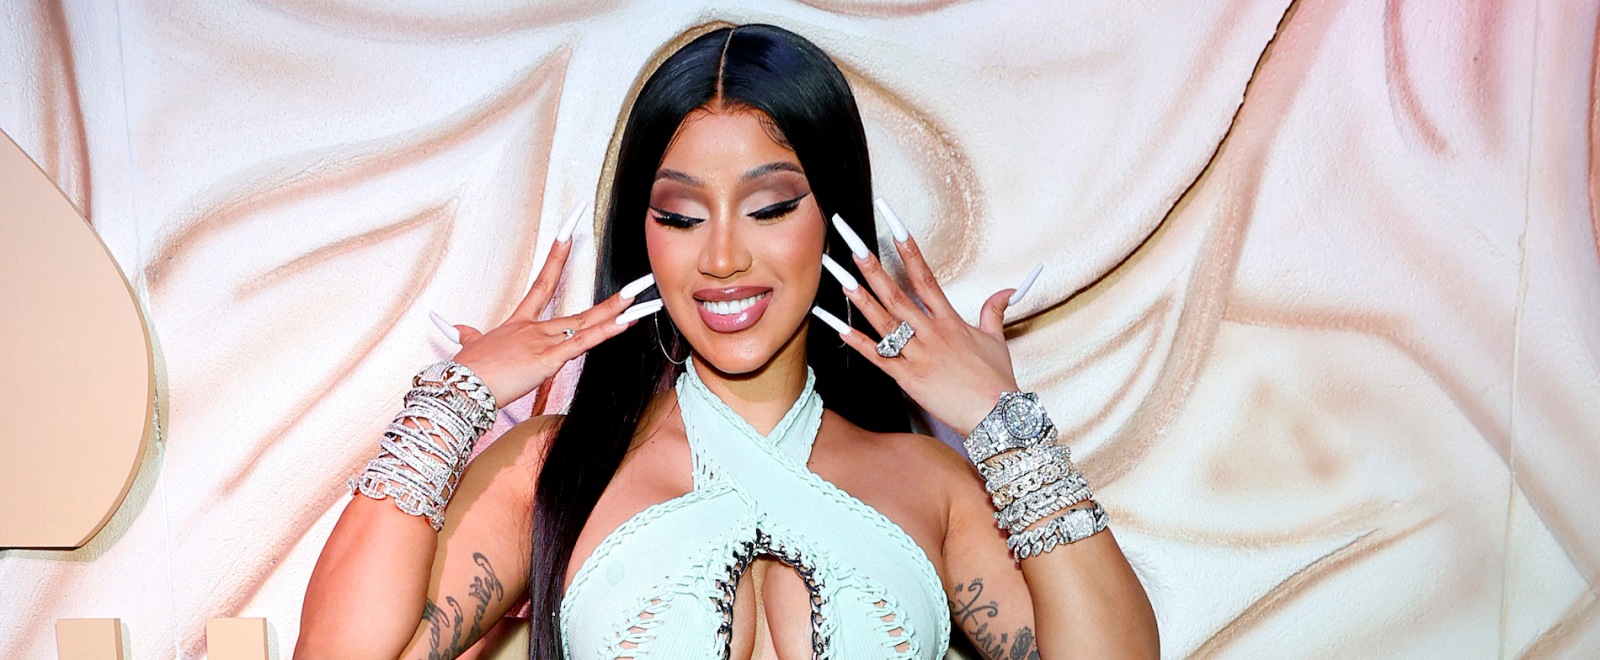 2048x1152 Cardi B 2018 2048x1152 Resolution HD 4k Wallpapers Images  Backgrounds Photos and Pictures